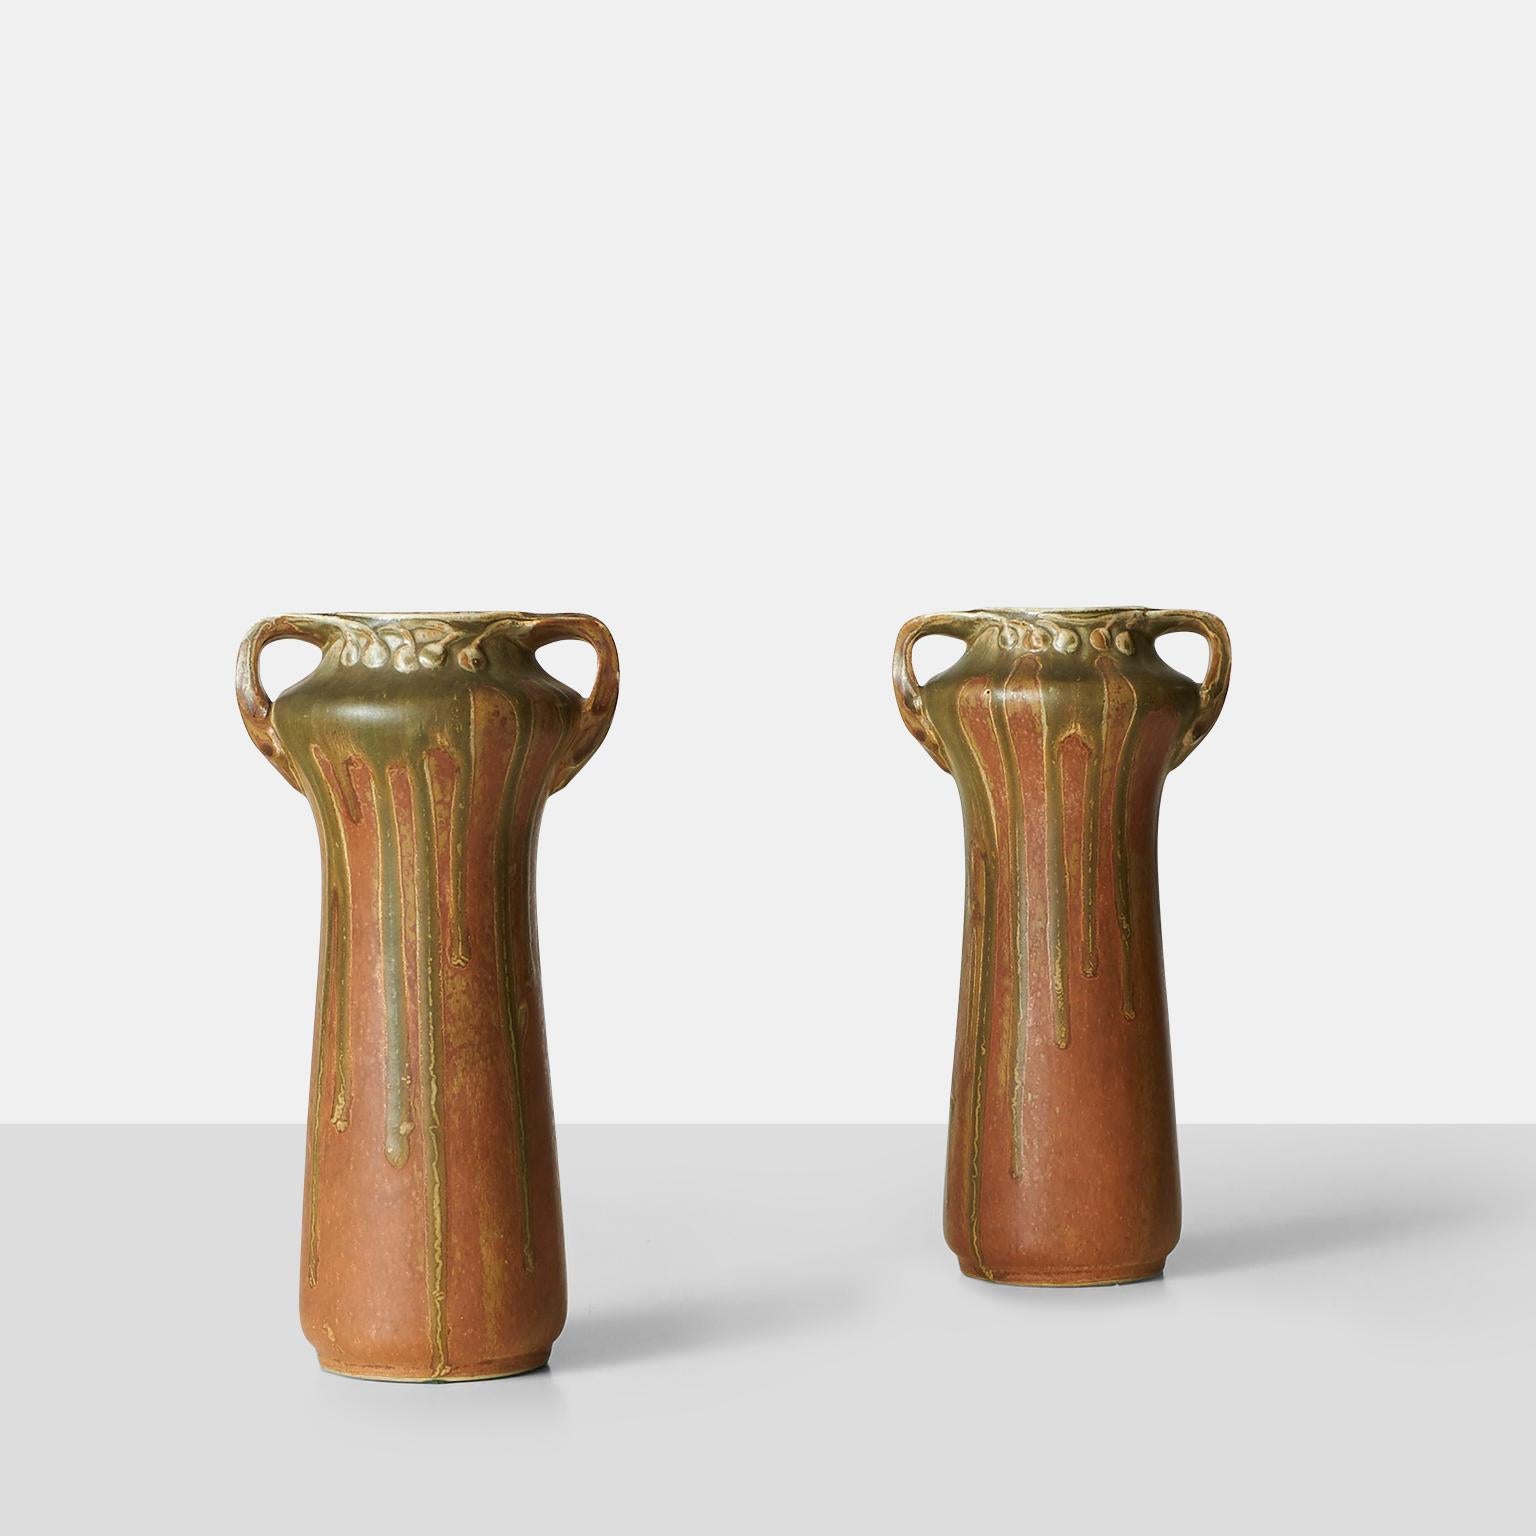 A pair of French art nouveau vases of earthenware modeled with two handles. Decorated with glazes in shades of brown. Marked Guillaume